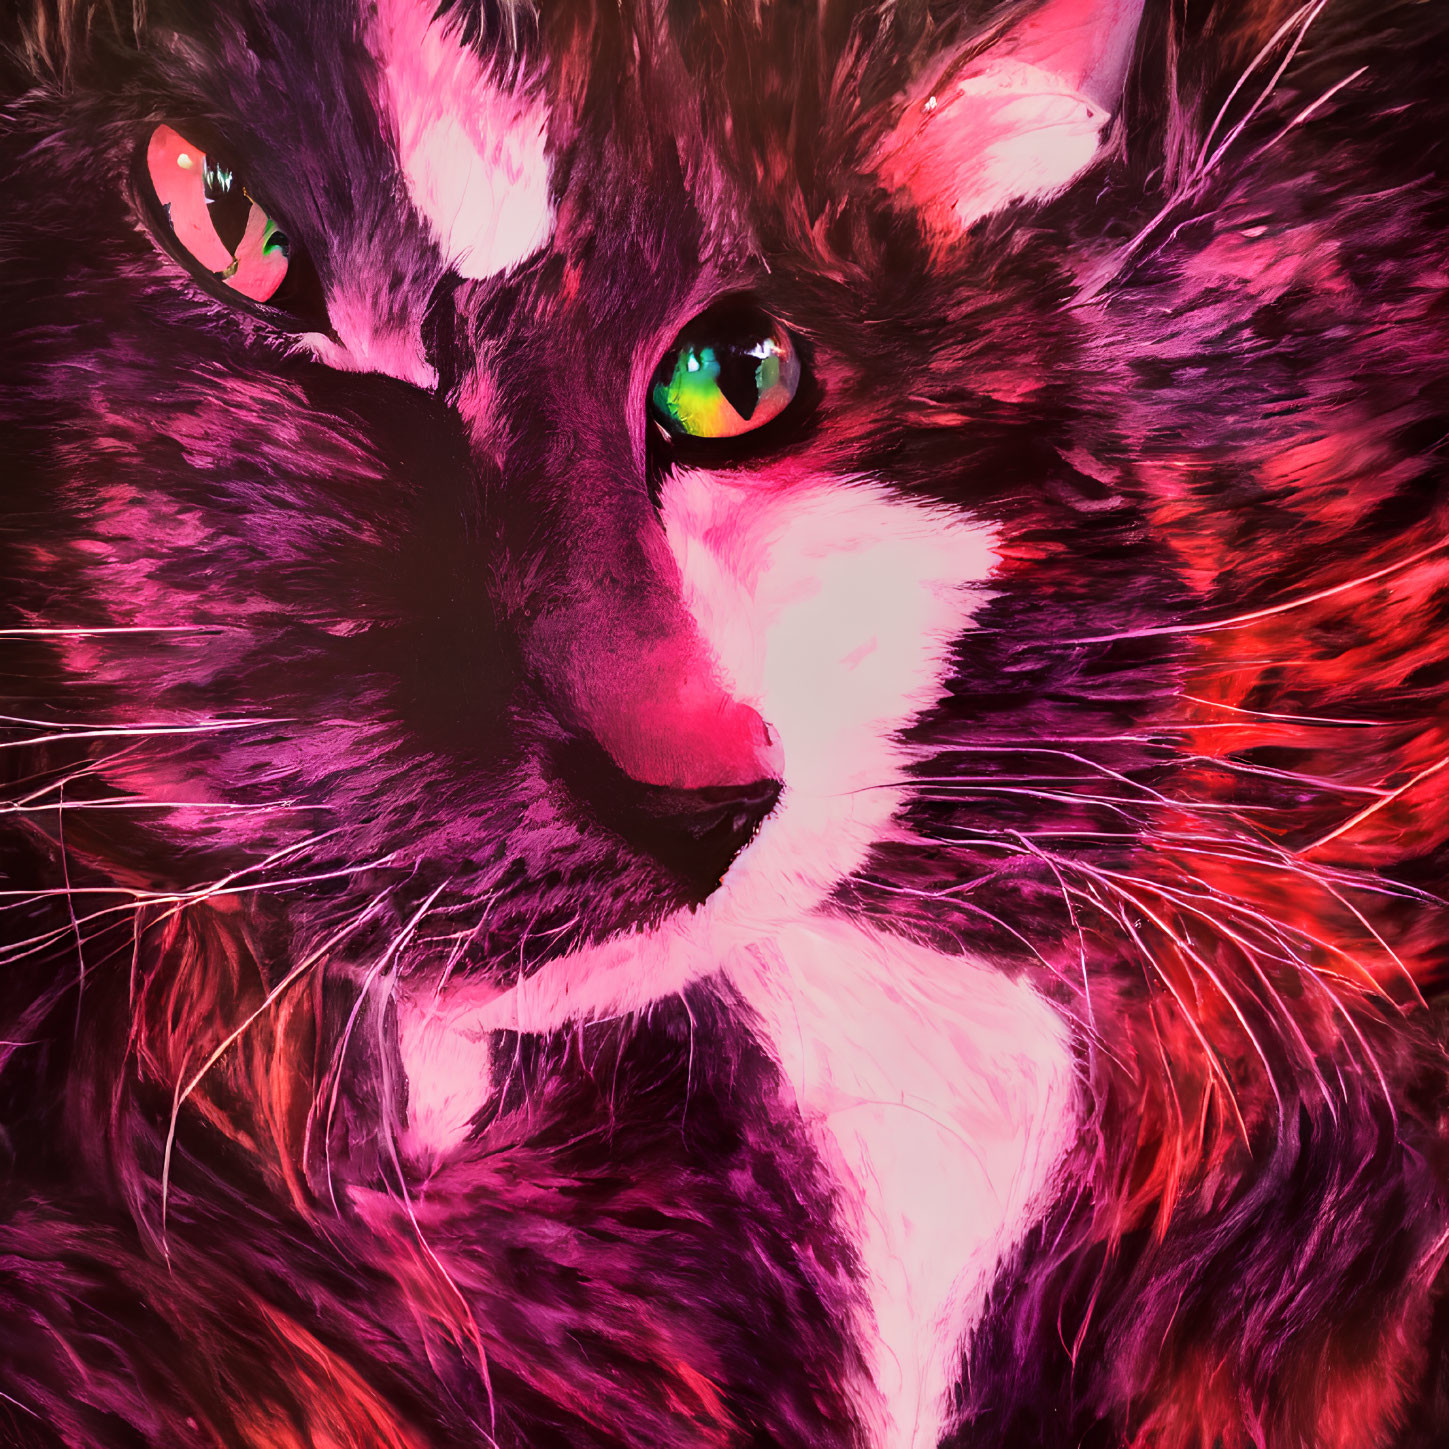 Colorful Digital Artwork of Cat with Green Eyes in Pink and Crimson Tones